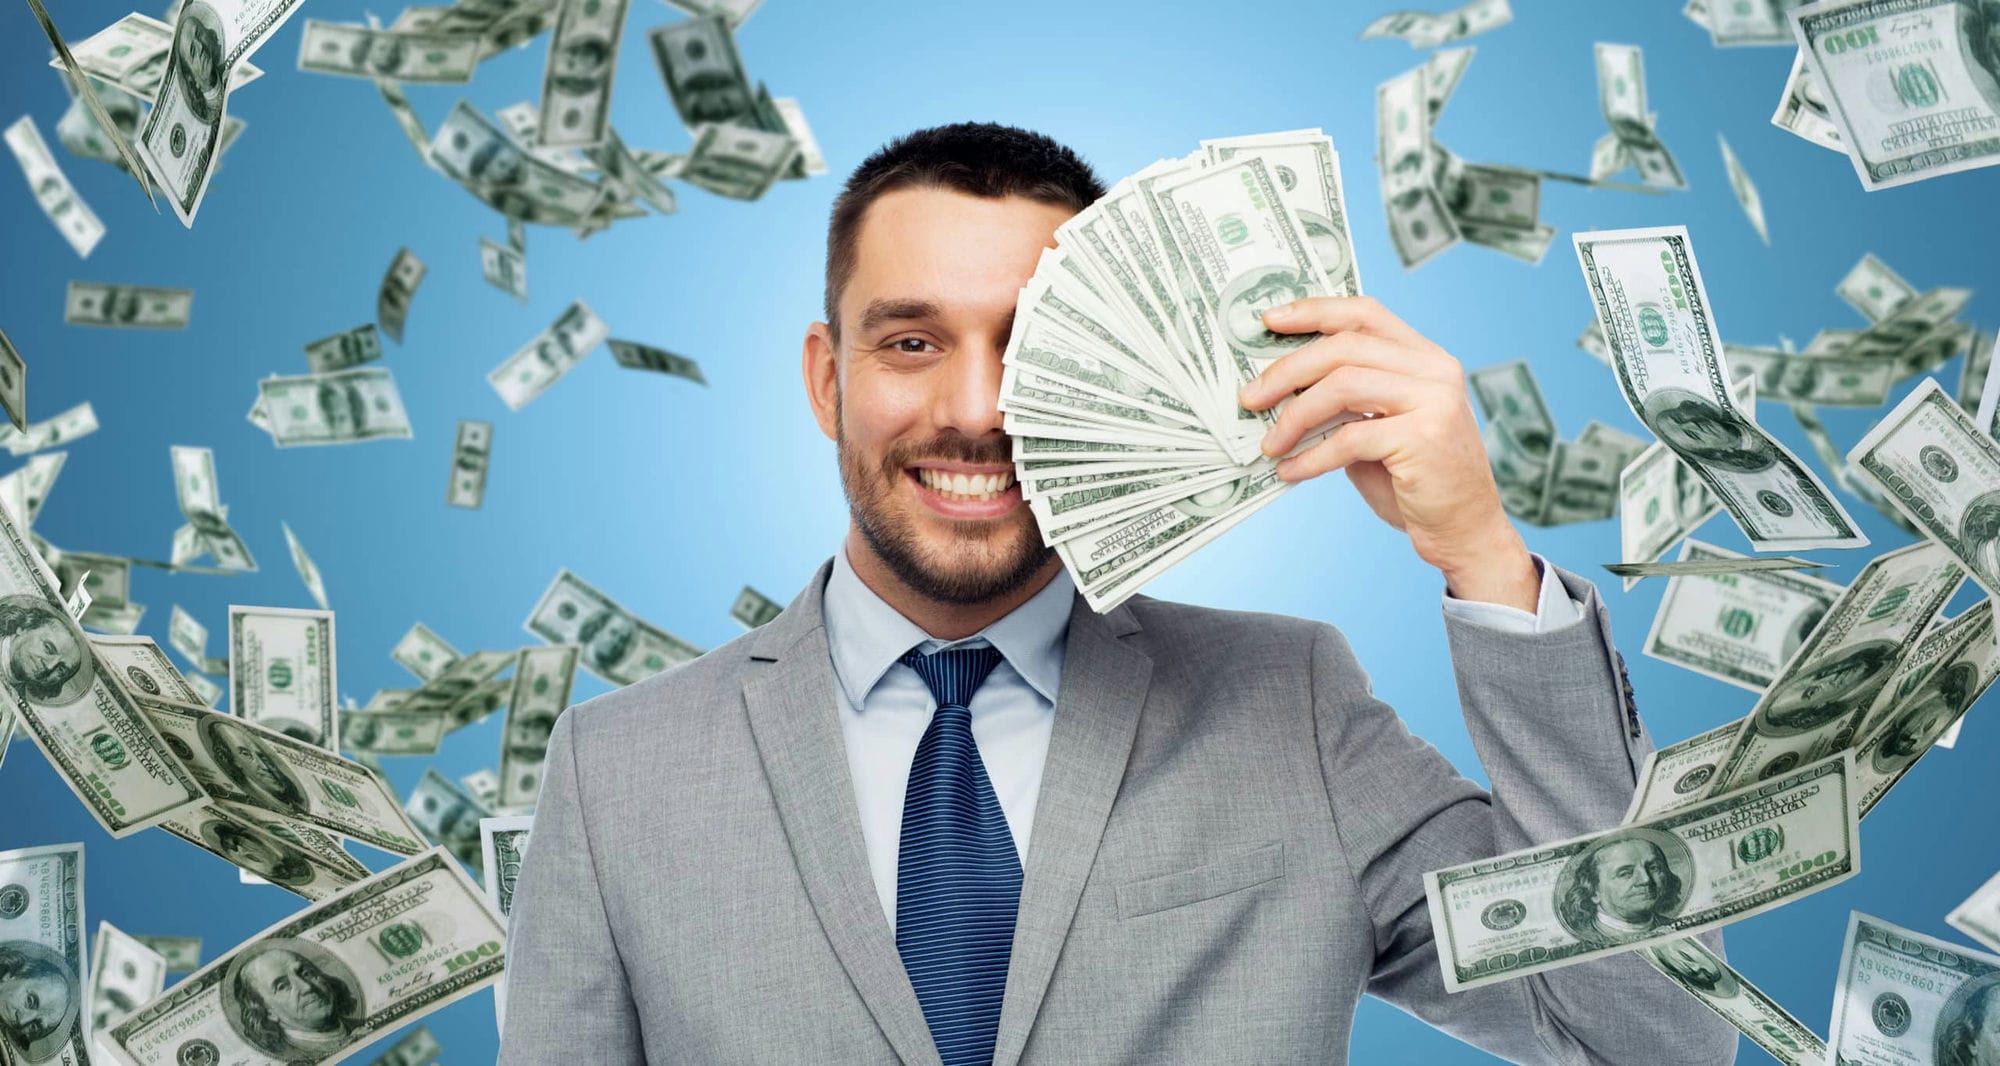 Business People And Finances Concept Smiling Businessman With Bundle